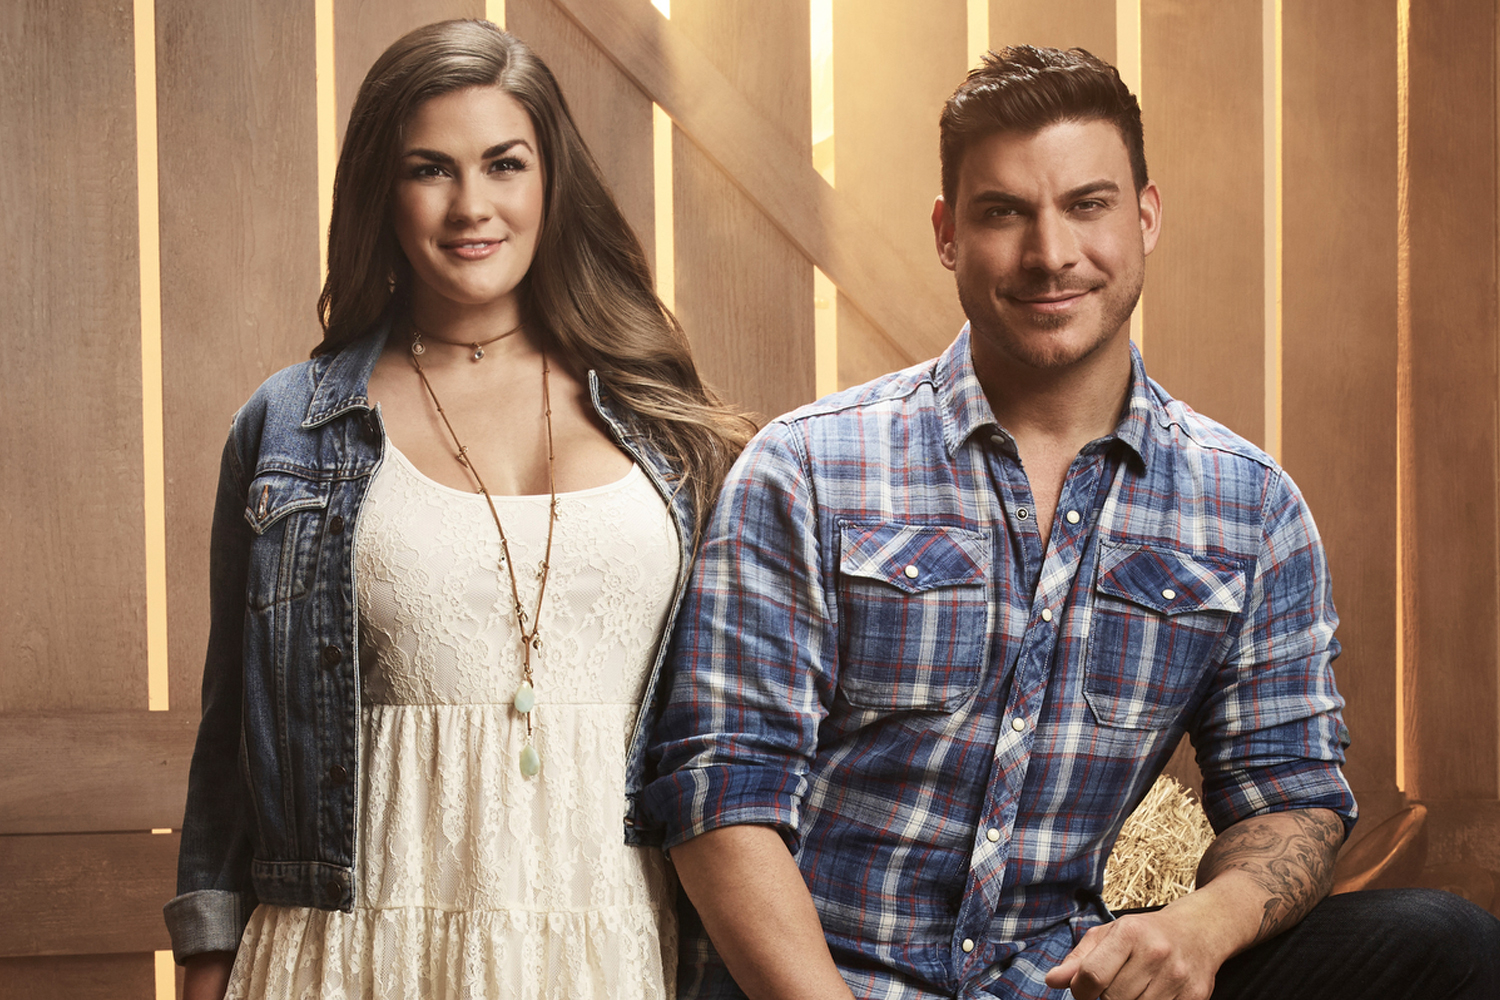 Brittany Cartwright and Jax Taylor in a barn for a promo shot of their 'Vanderpump Rules' spinoff